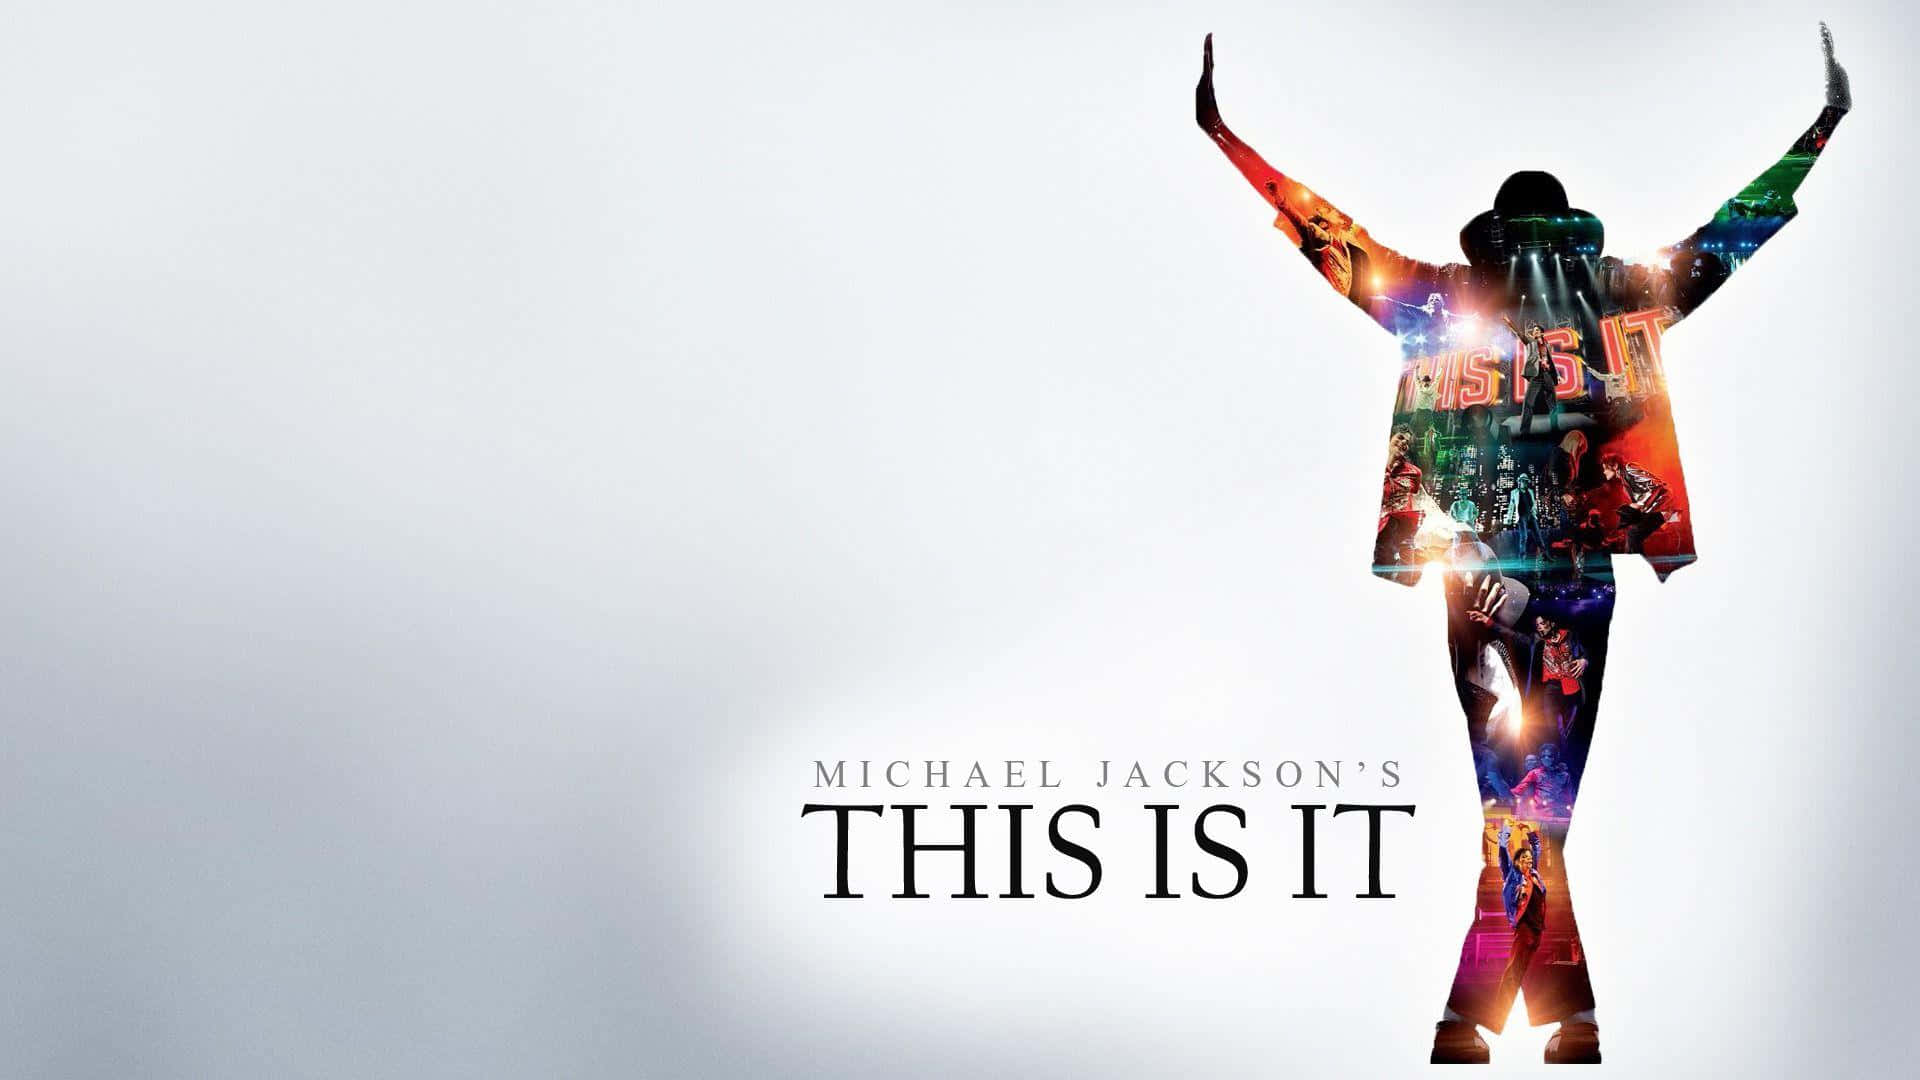 Michael Jackson This Is It Promotional Poster Wallpaper